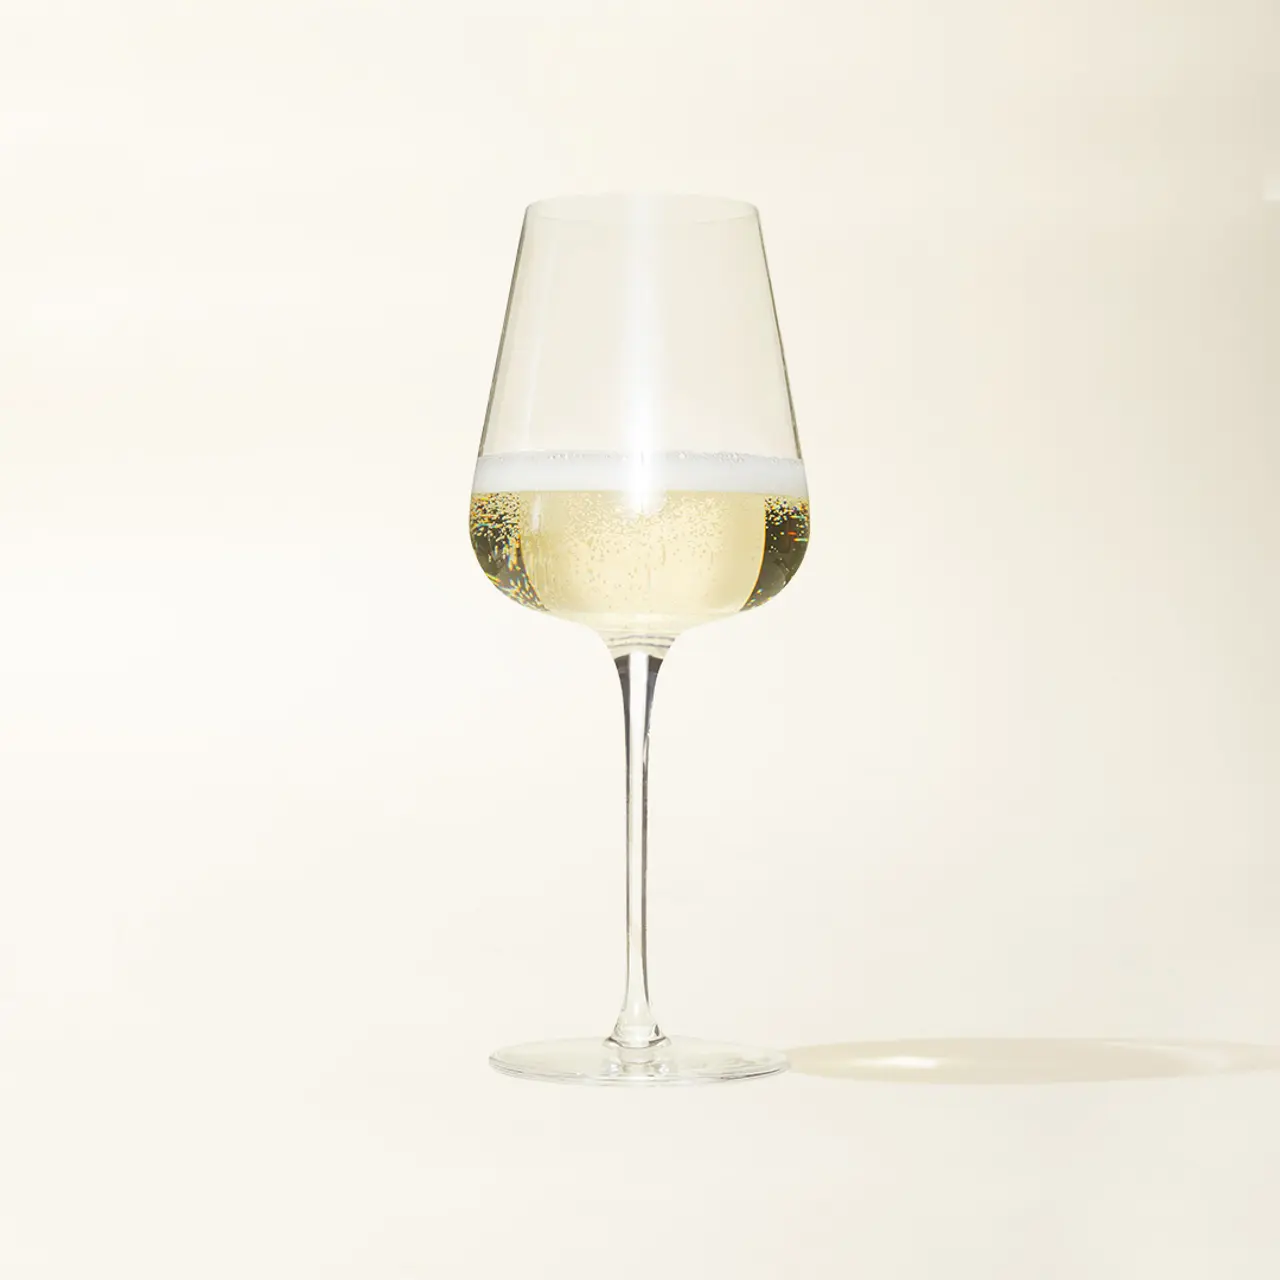 A glass of sparkling wine is set against a plain background, capturing the effervescence and clarity of the beverage.